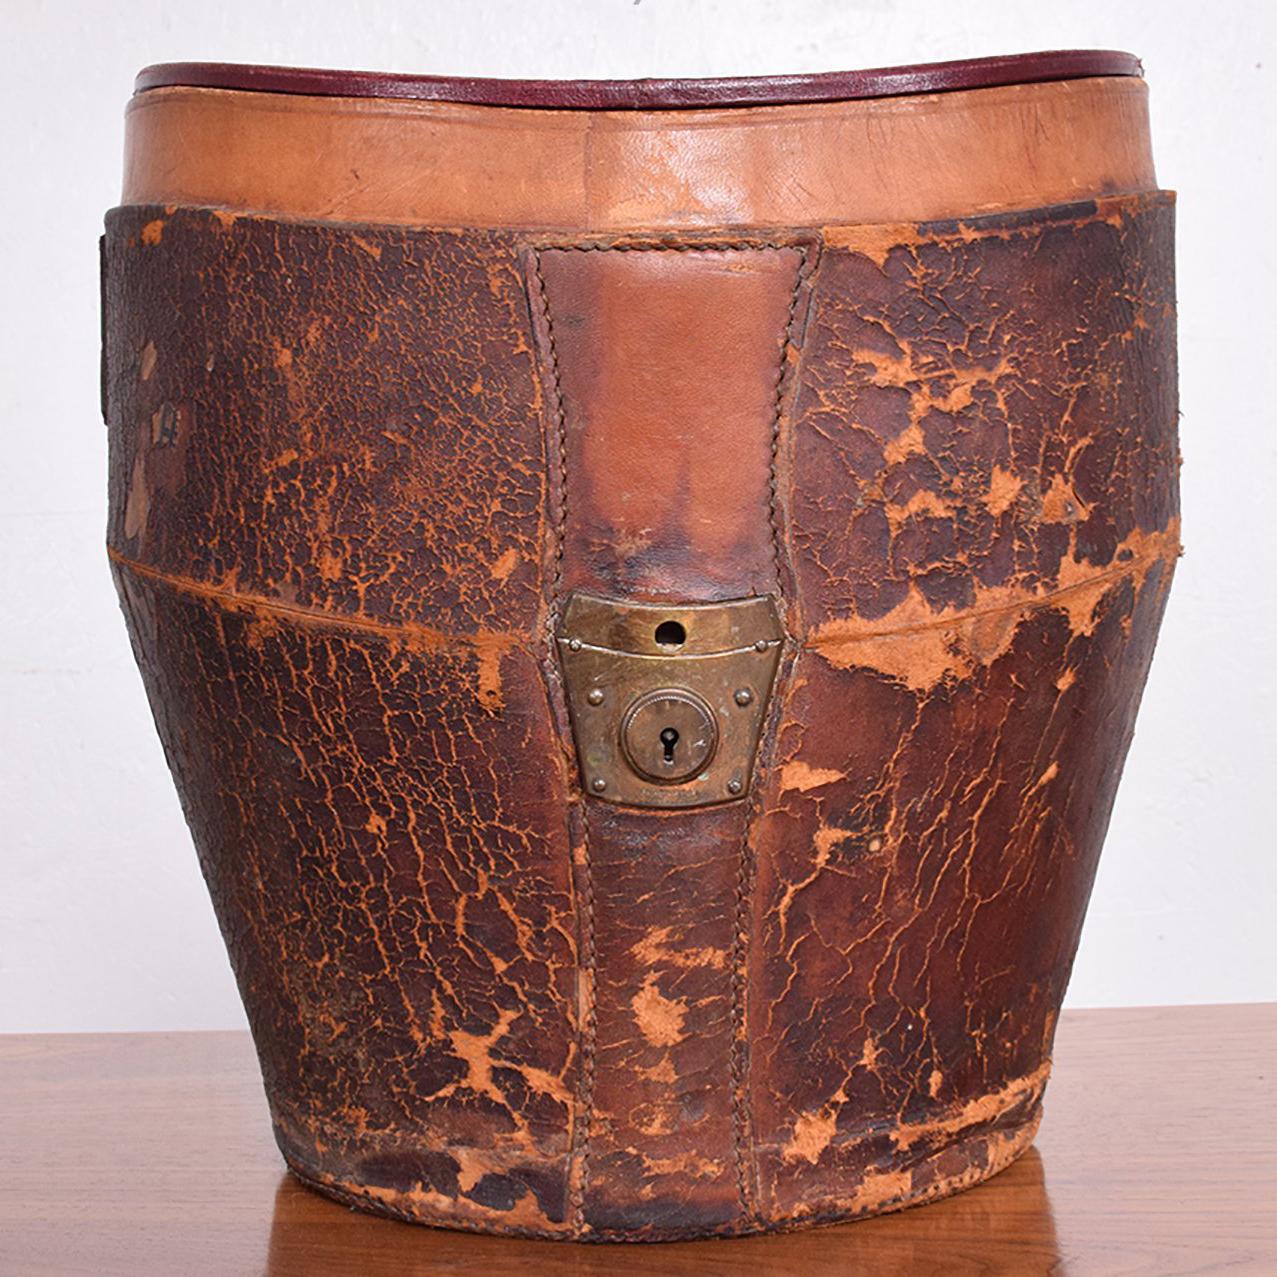 For your consideration a beautiful antique distressed leather luggage hat box,
USA, 1800s.
     